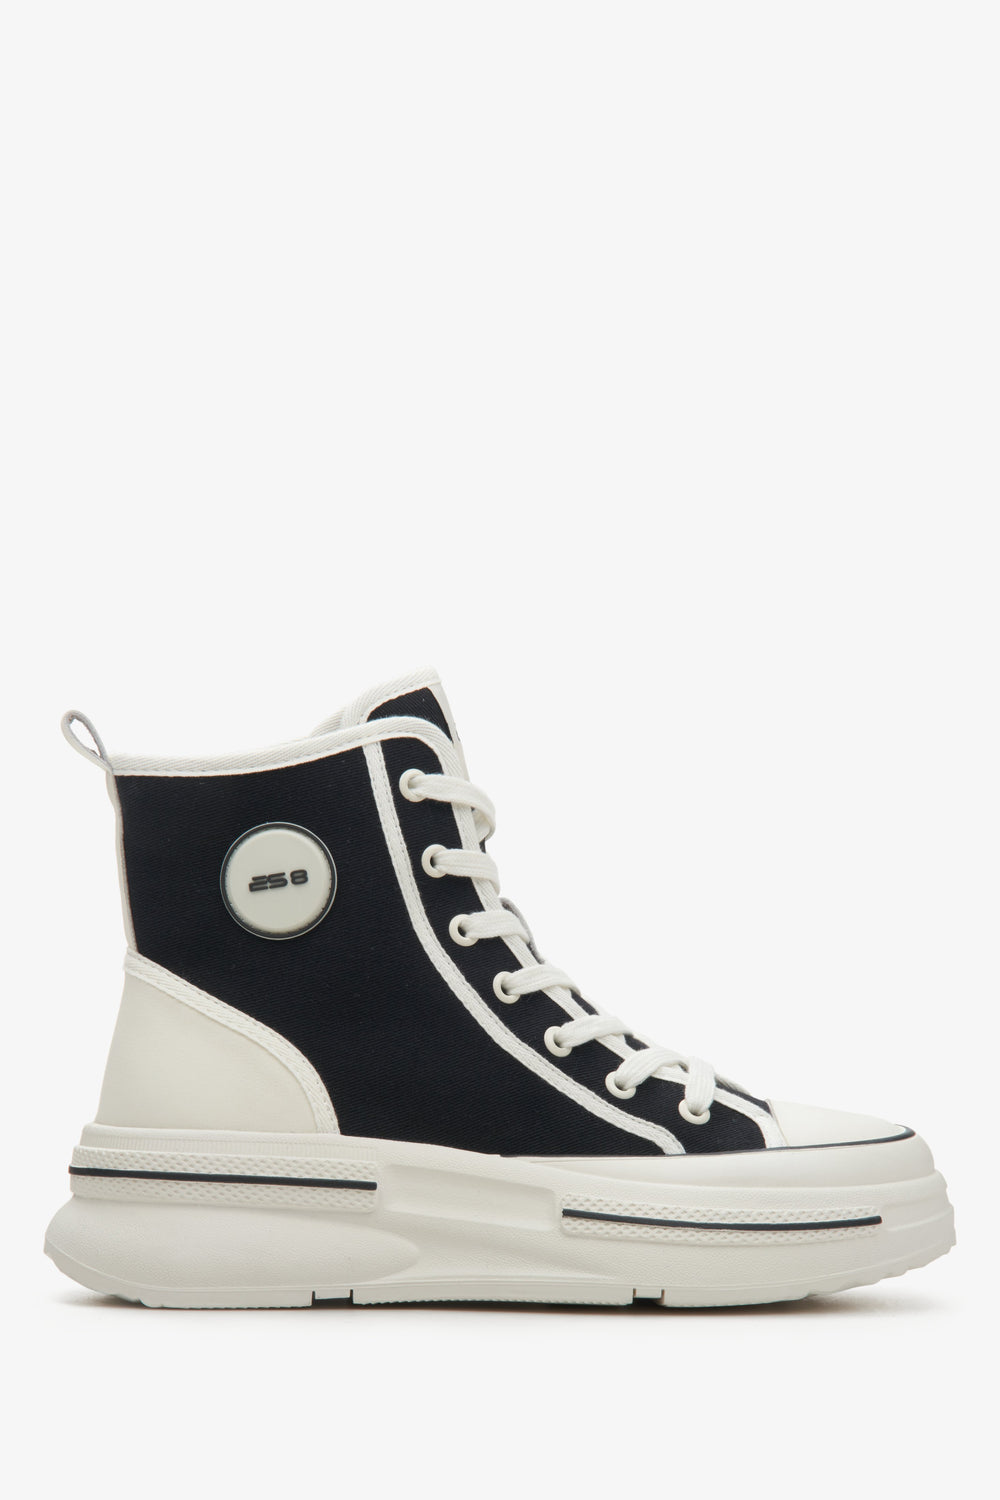 Women's Black High-Top Sneakers made of Soft Textiles ES 8 ER00114603.